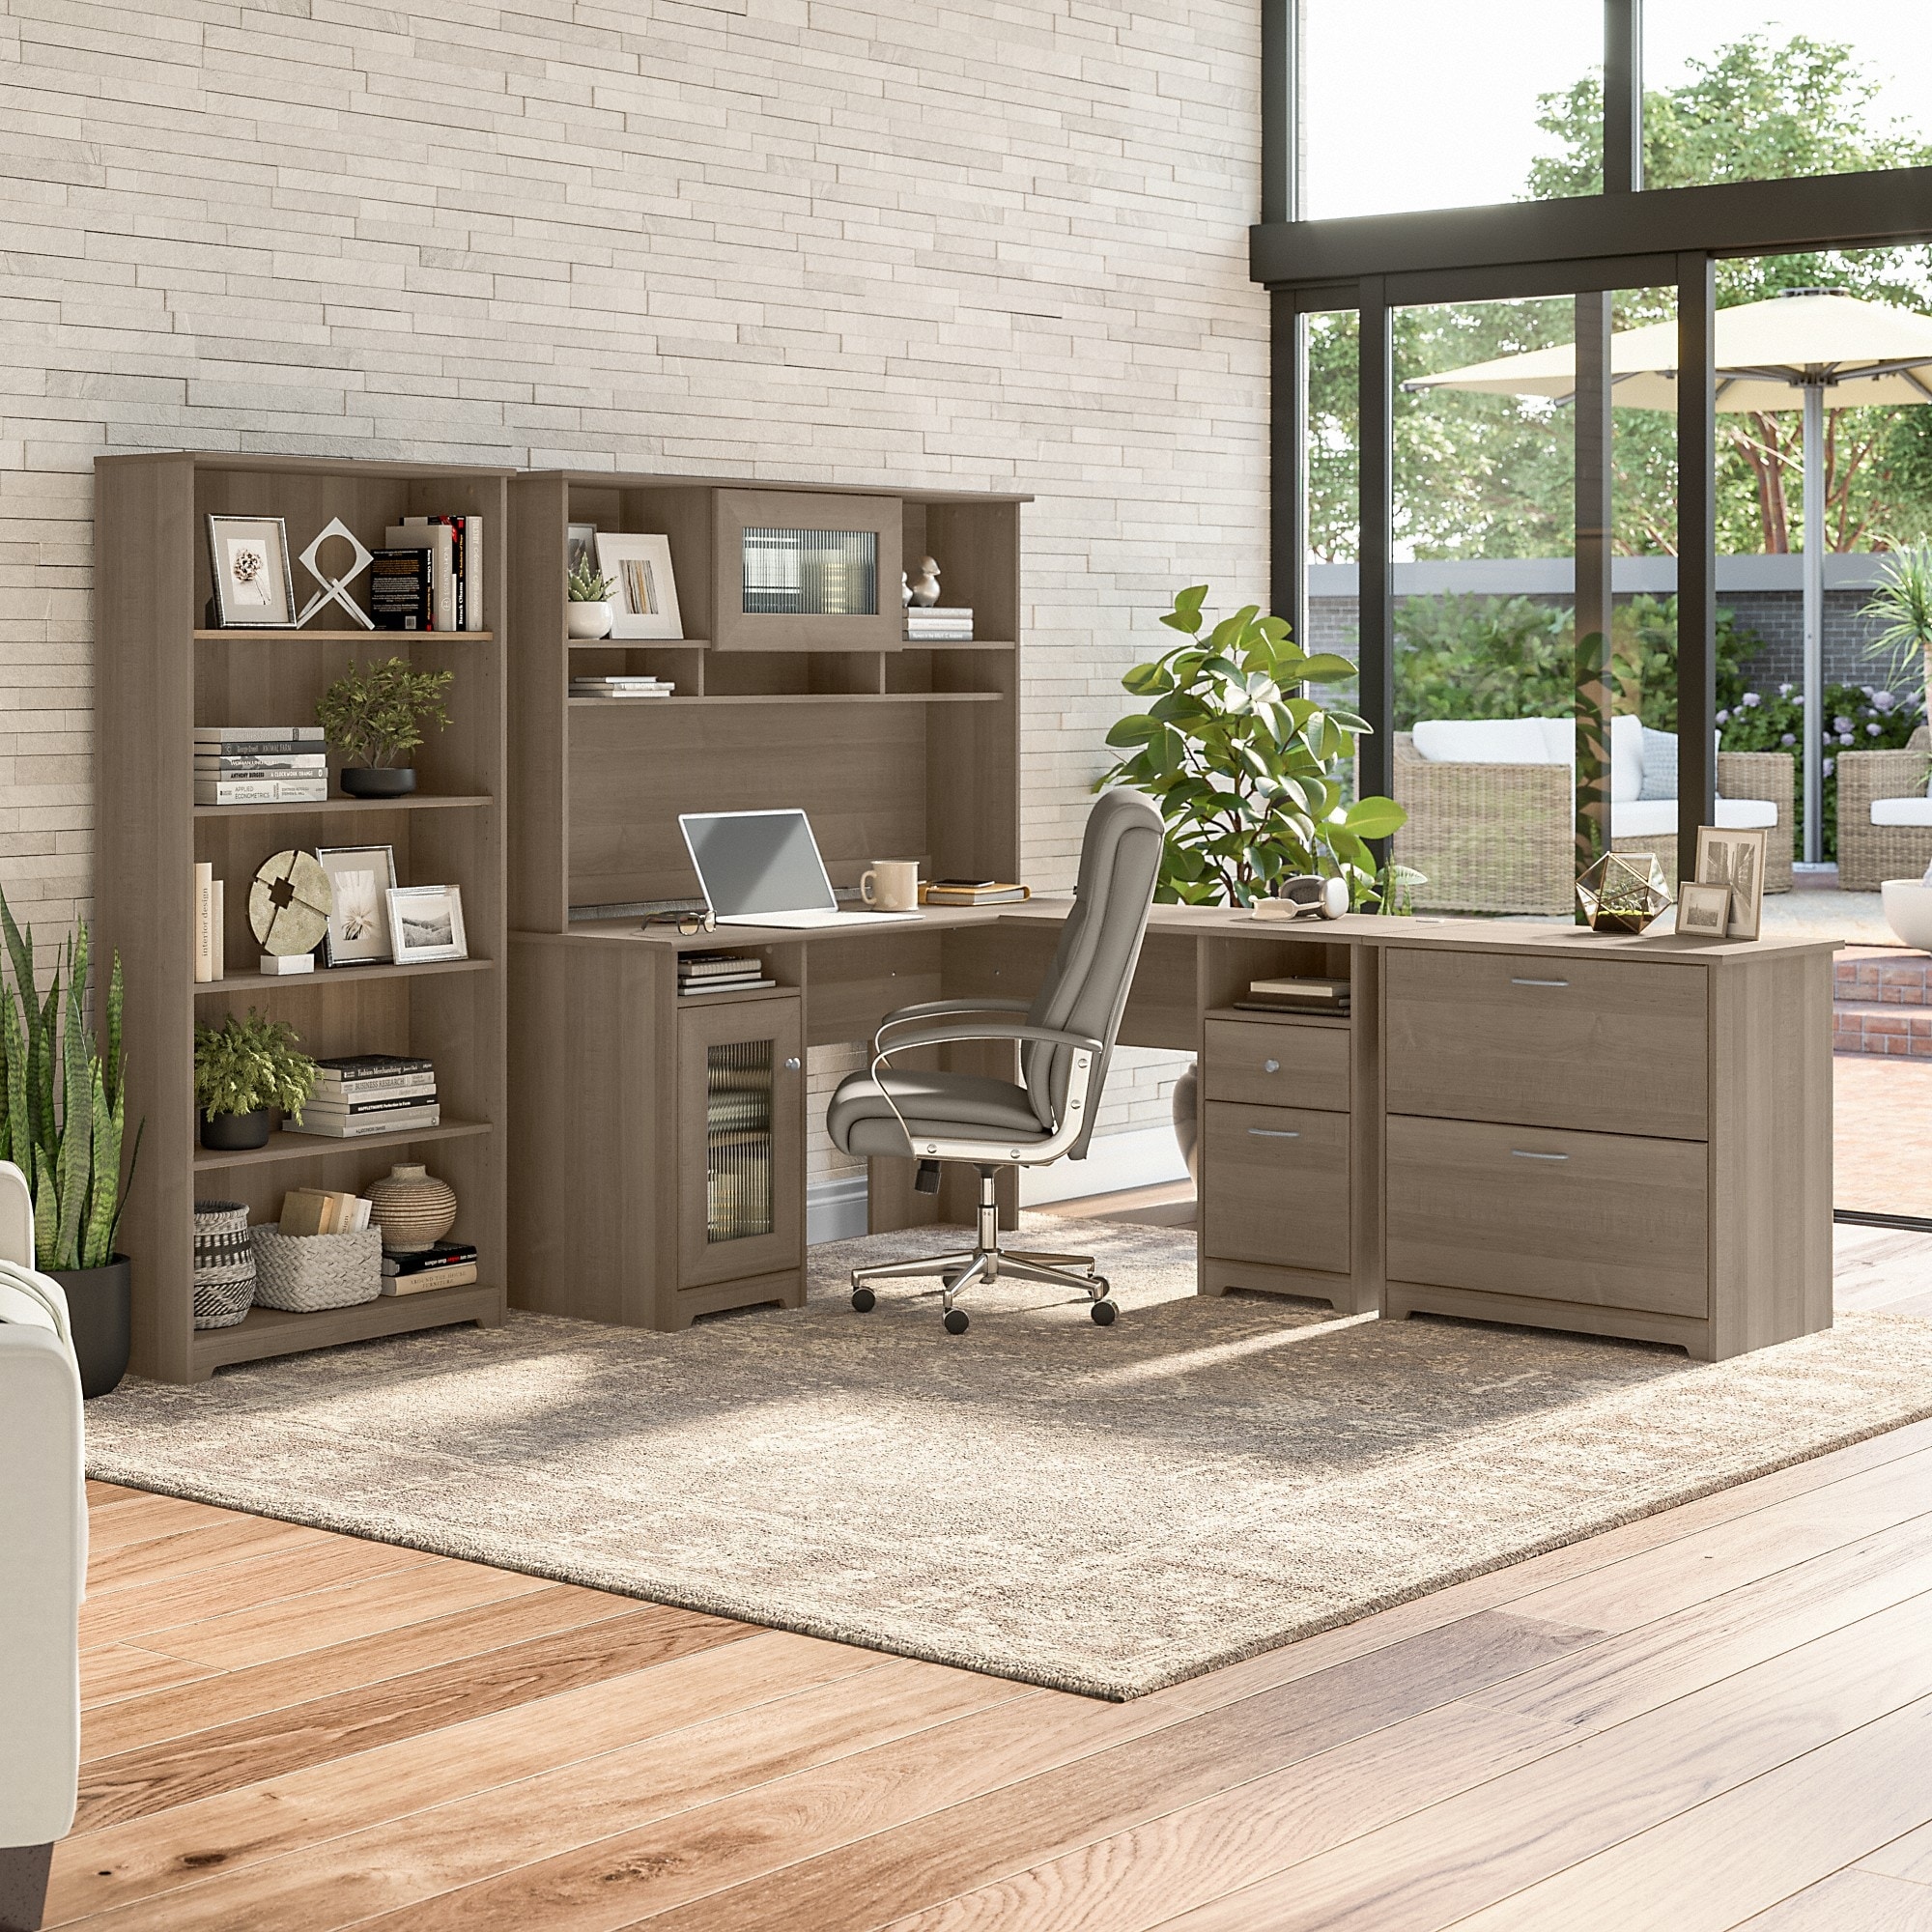 https://ak1.ostkcdn.com/images/products/is/images/direct/68a12cffd55447fbfdfe522762b9730aa1139e24/Cabot-60W-L-Desk-with-Hutch%2C-Cabinet-and-Bookcase-by-Bush-Furniture.jpg